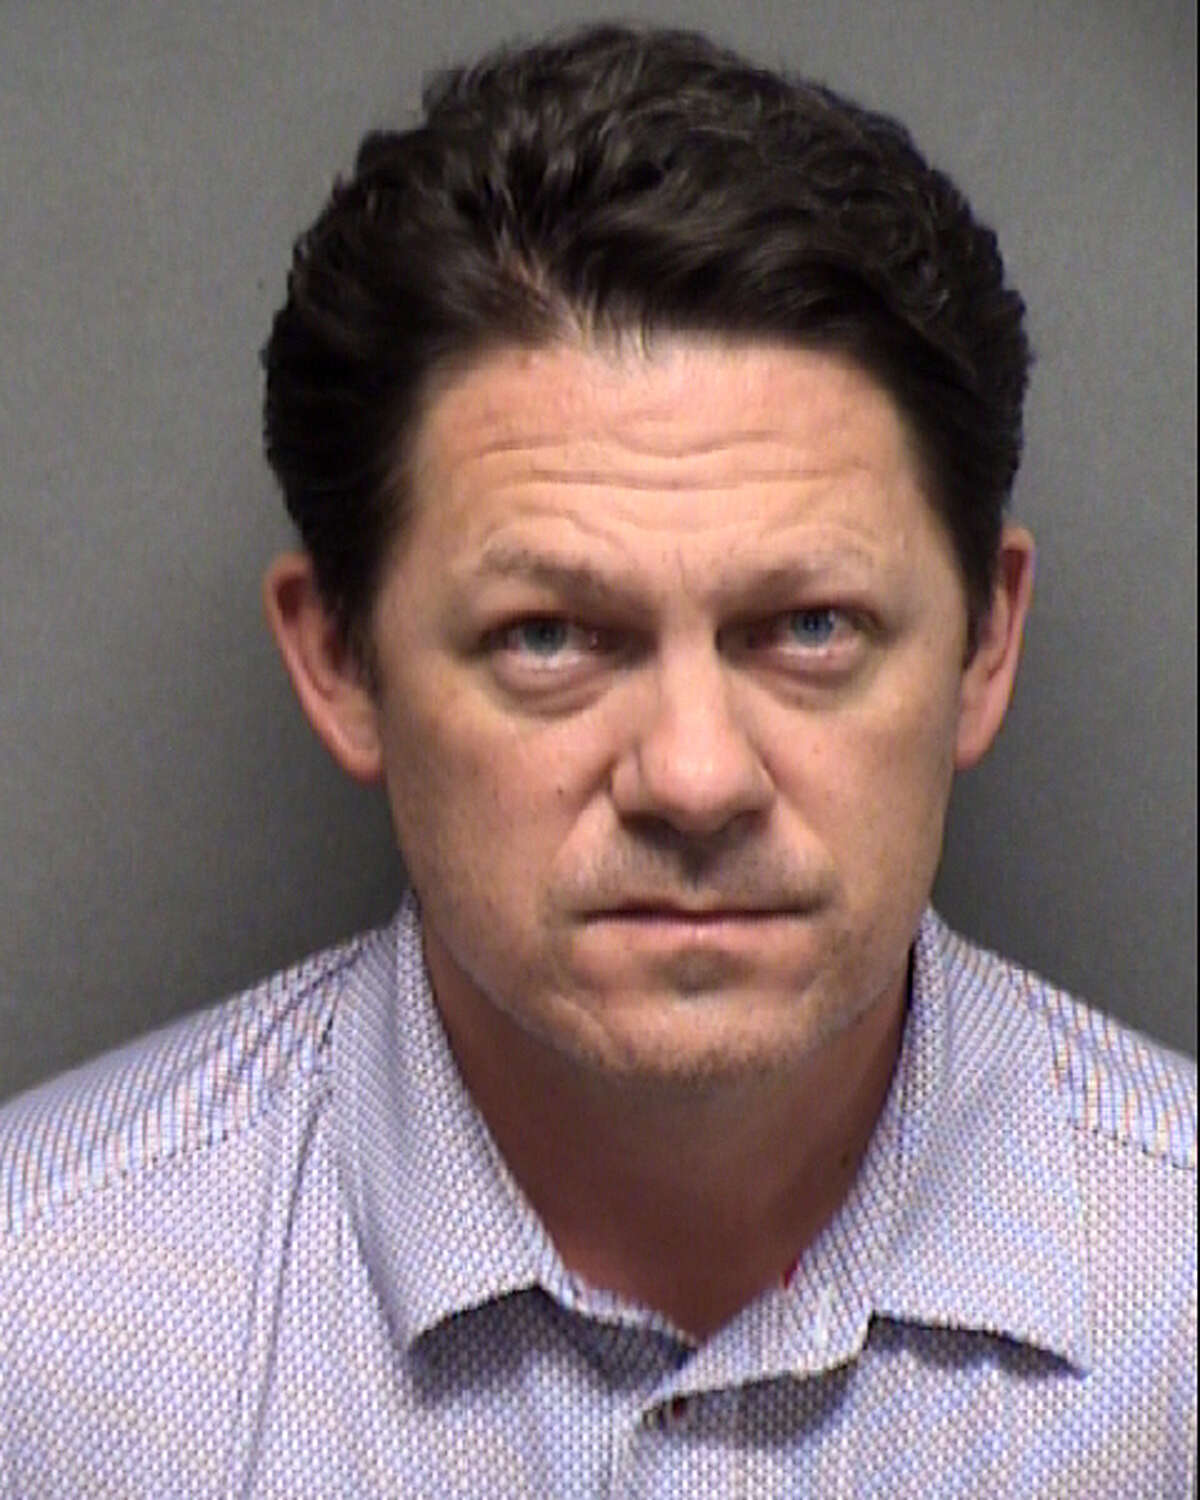 Former City Councilman Christopher "Chip" Haass, 43, was arrested on a prostitution charge Wednesday afternoon, according to court records.